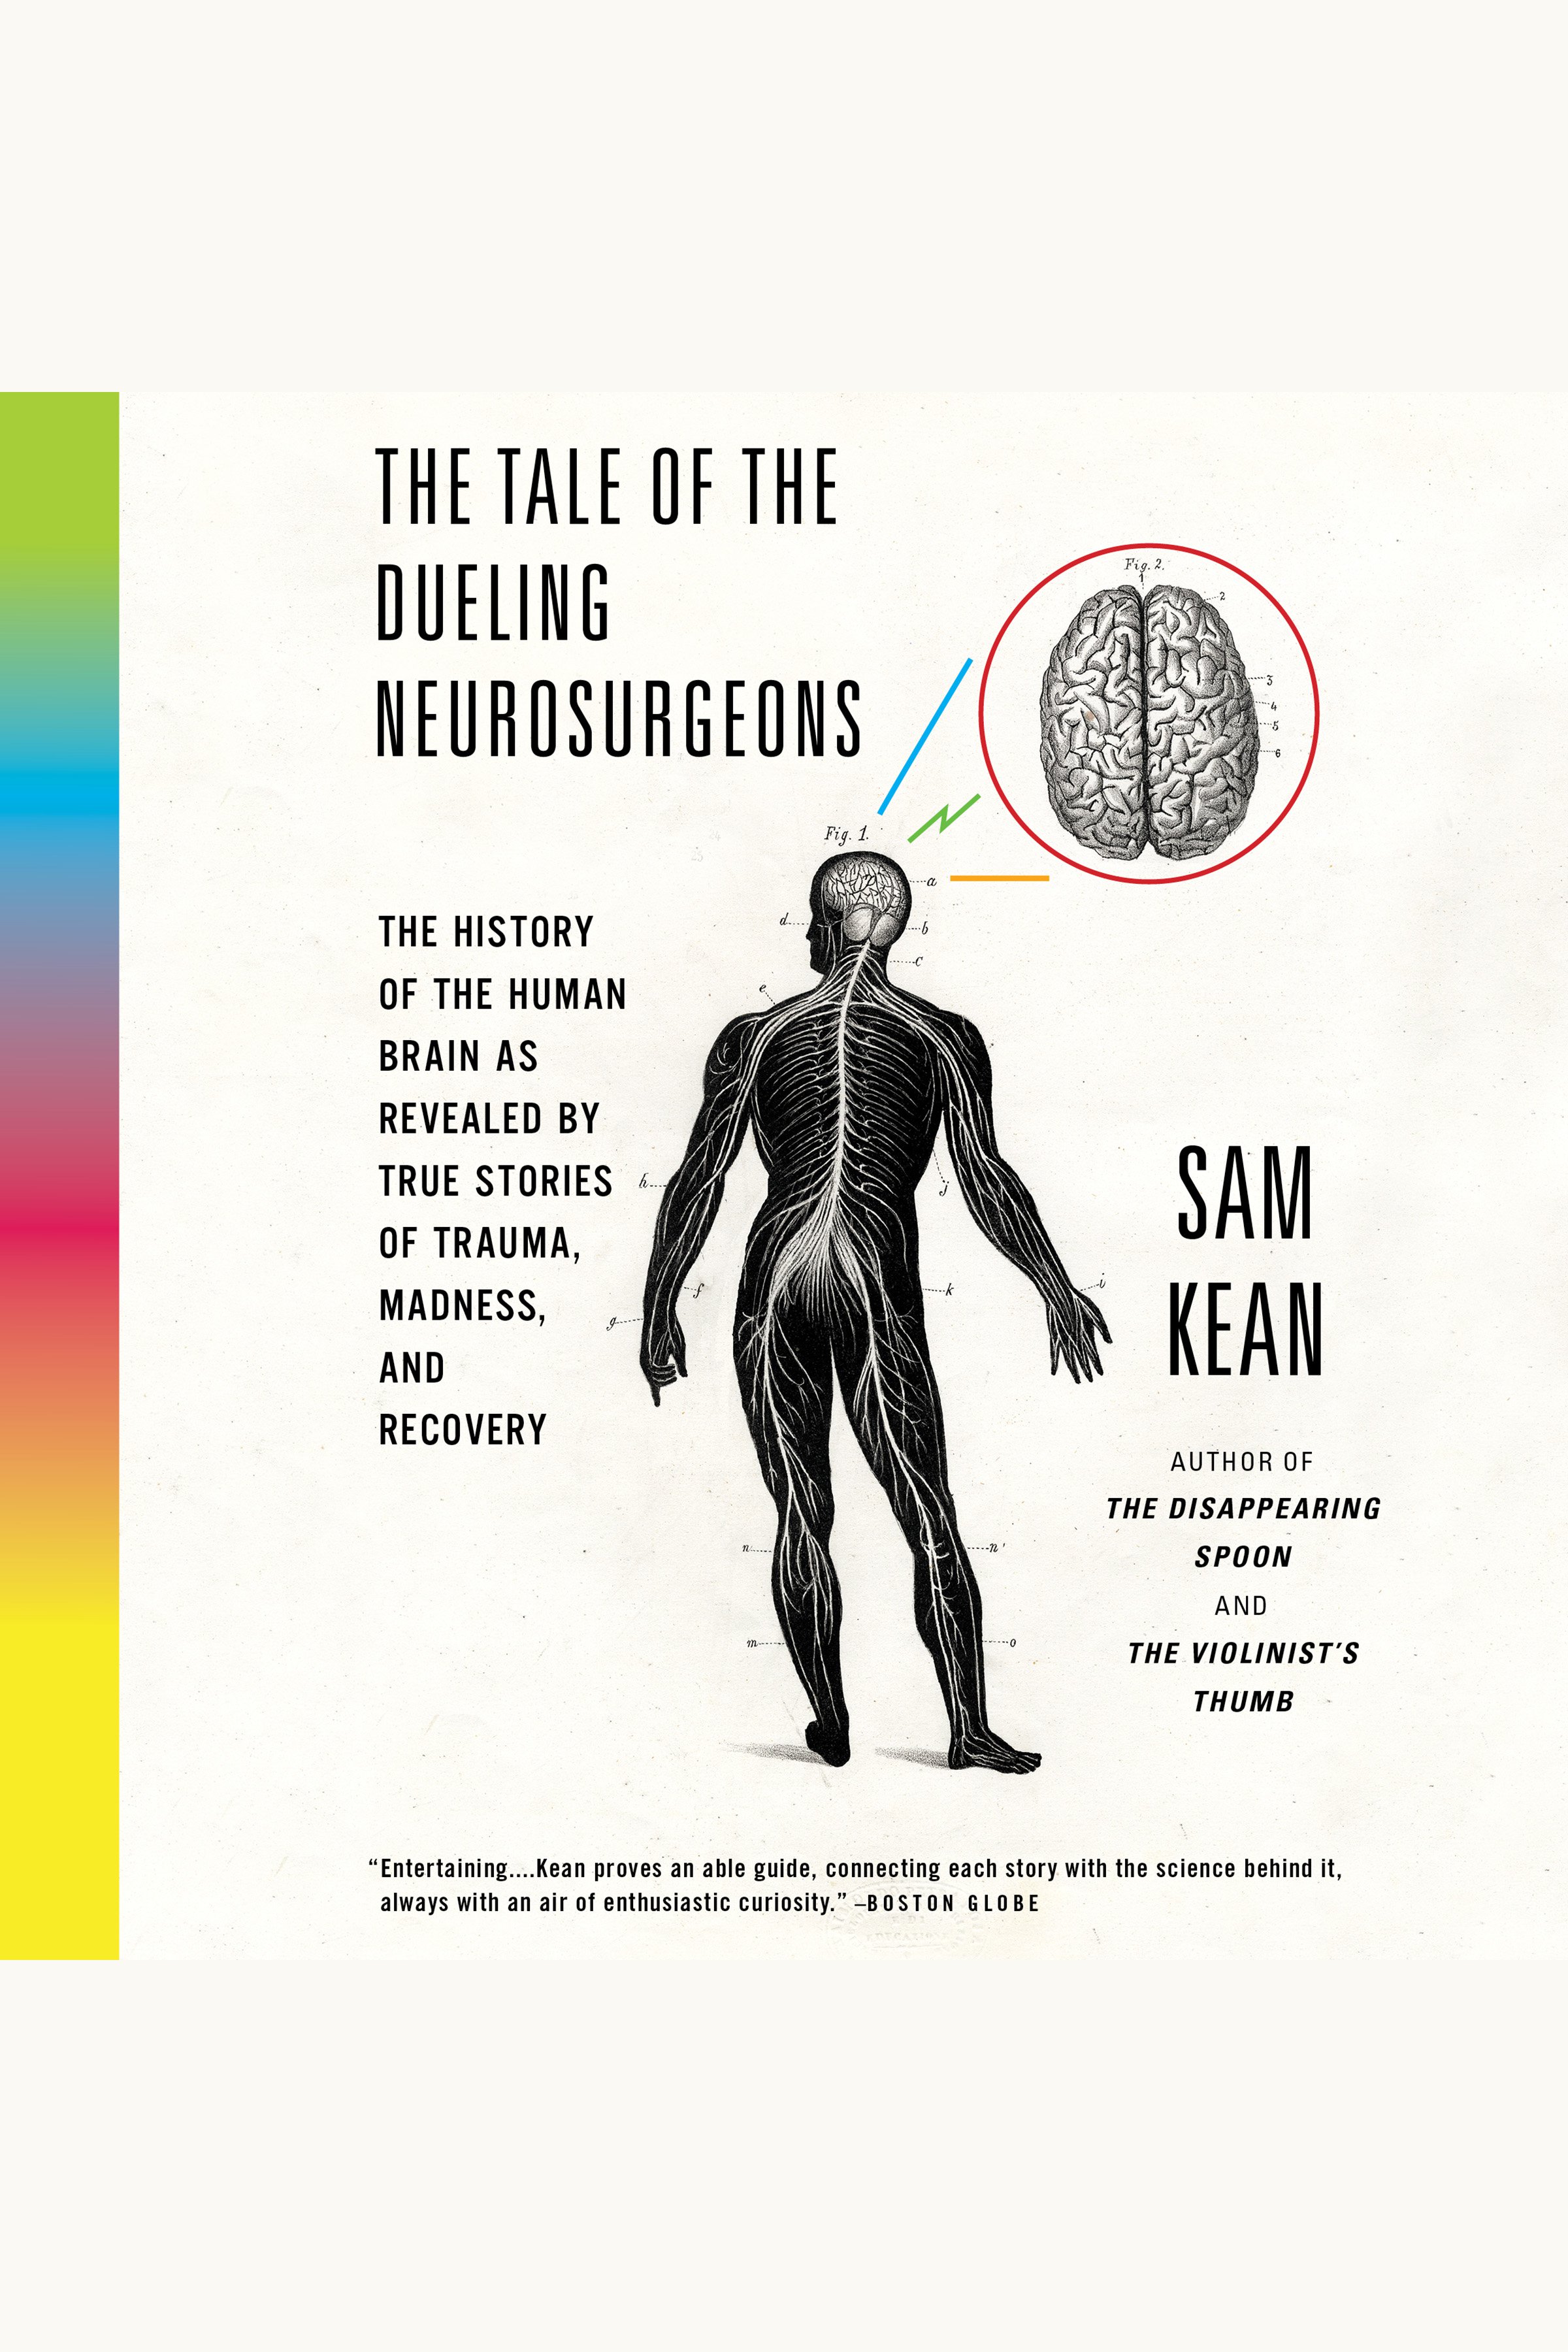 The tale of the dueling neurosurgeons the history of the human brain as revealed by true stories of trauma, madness, and recovery cover image